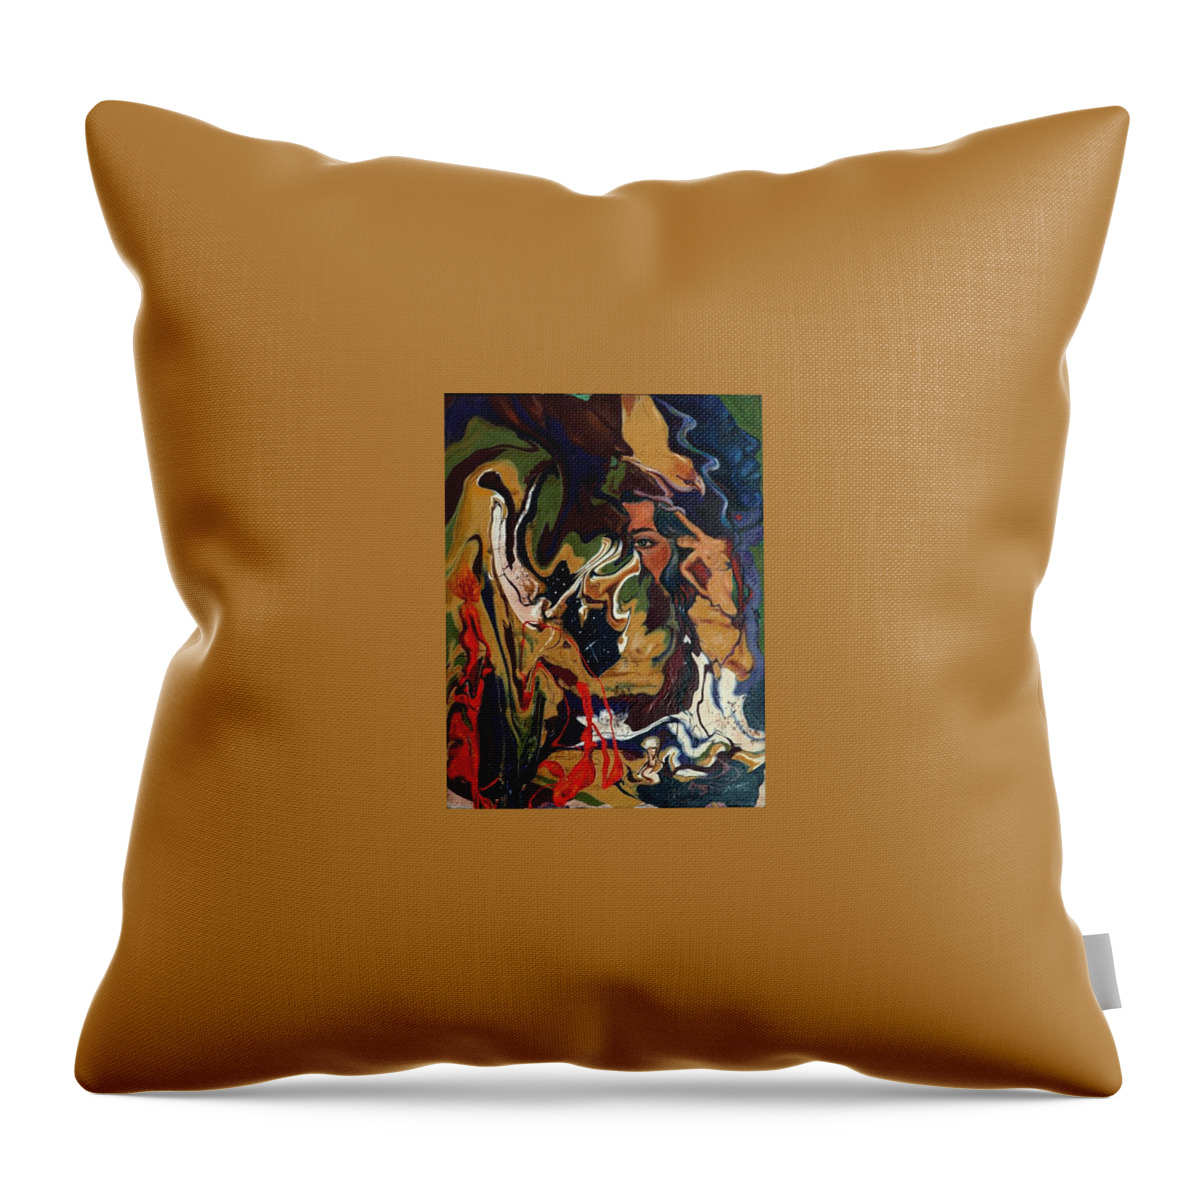 Masks Throw Pillow featuring the mixed media Peaking by Sofanya White